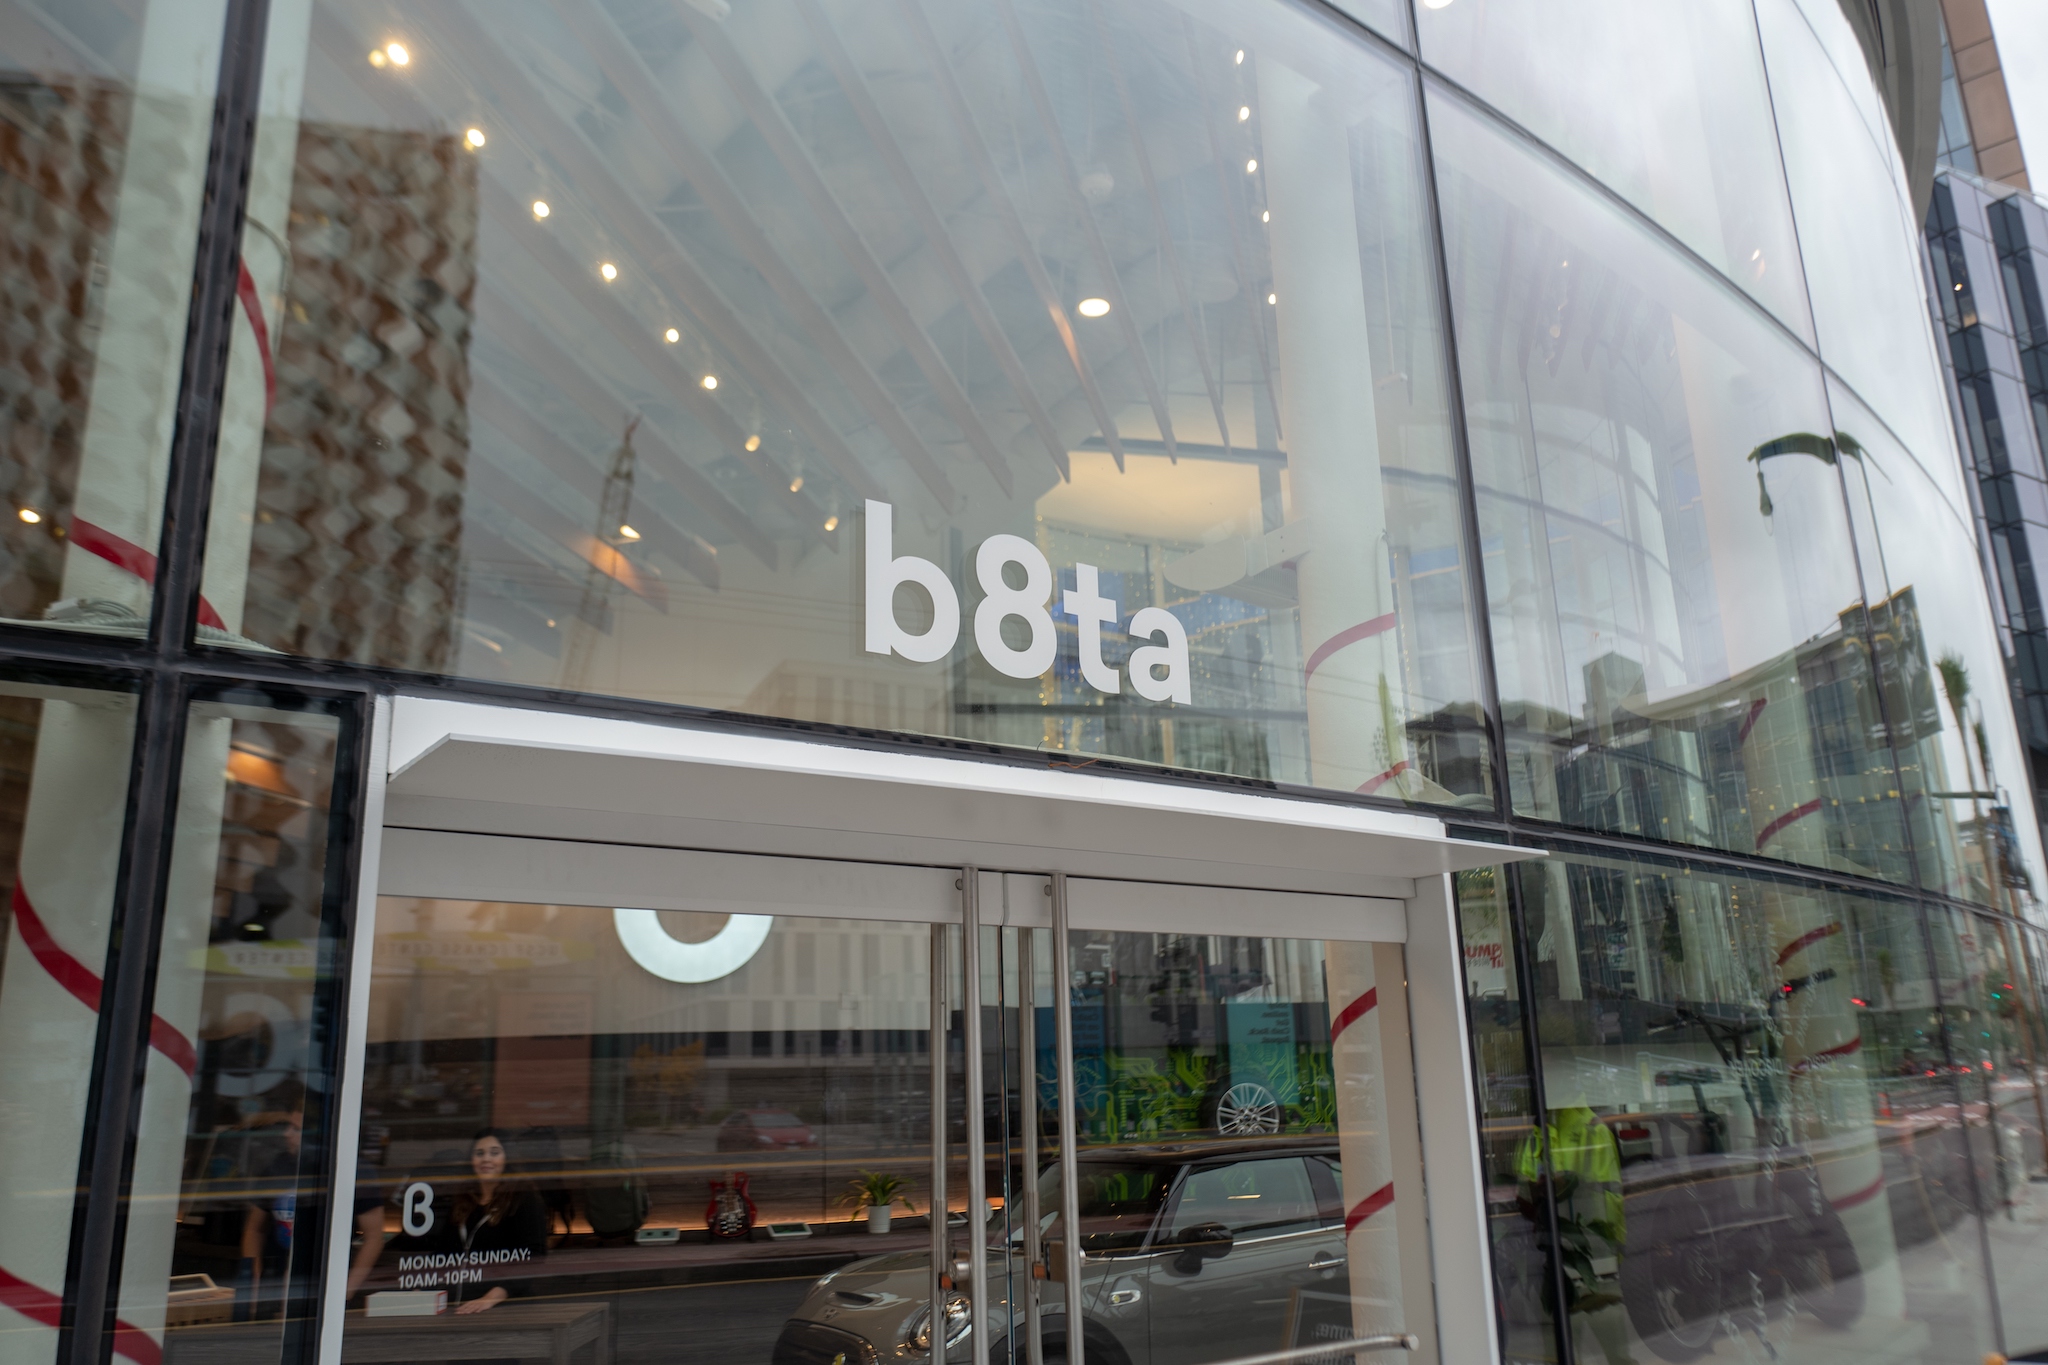 B8ta closes another store in San Francisco after armed robbery